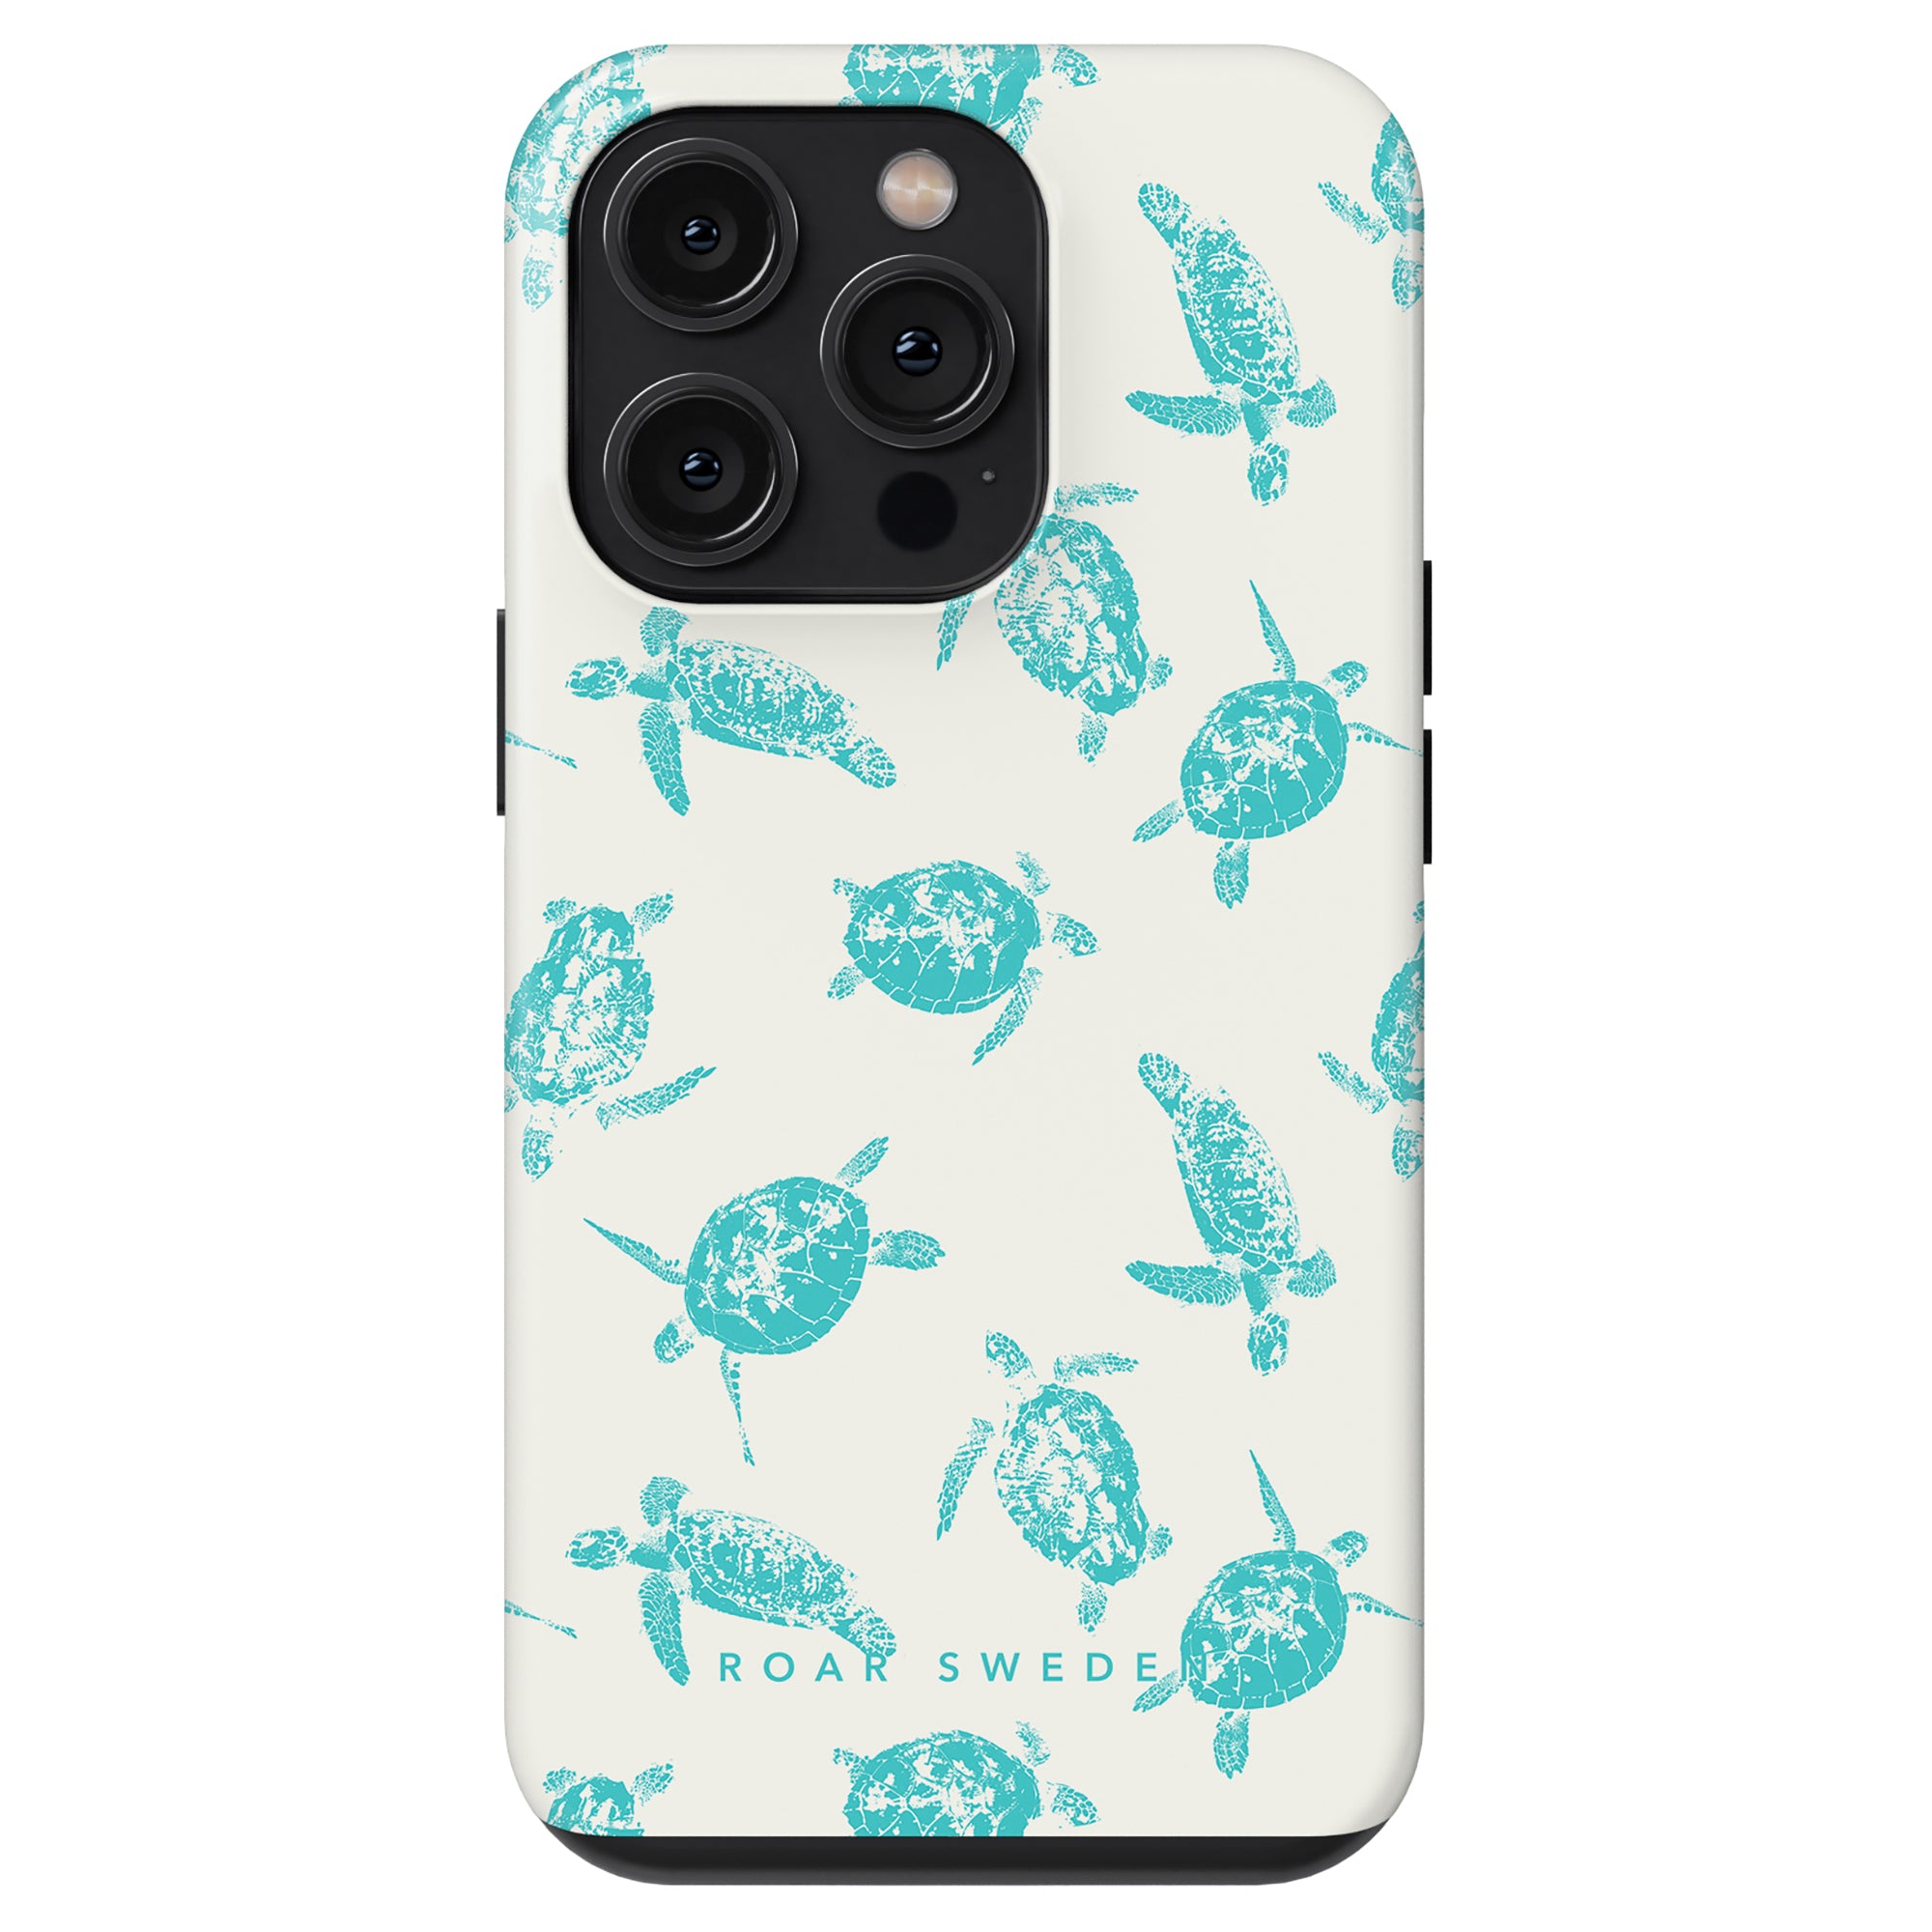 Smartphone with a Sea Turtles - Tough Case from our ocean collection.